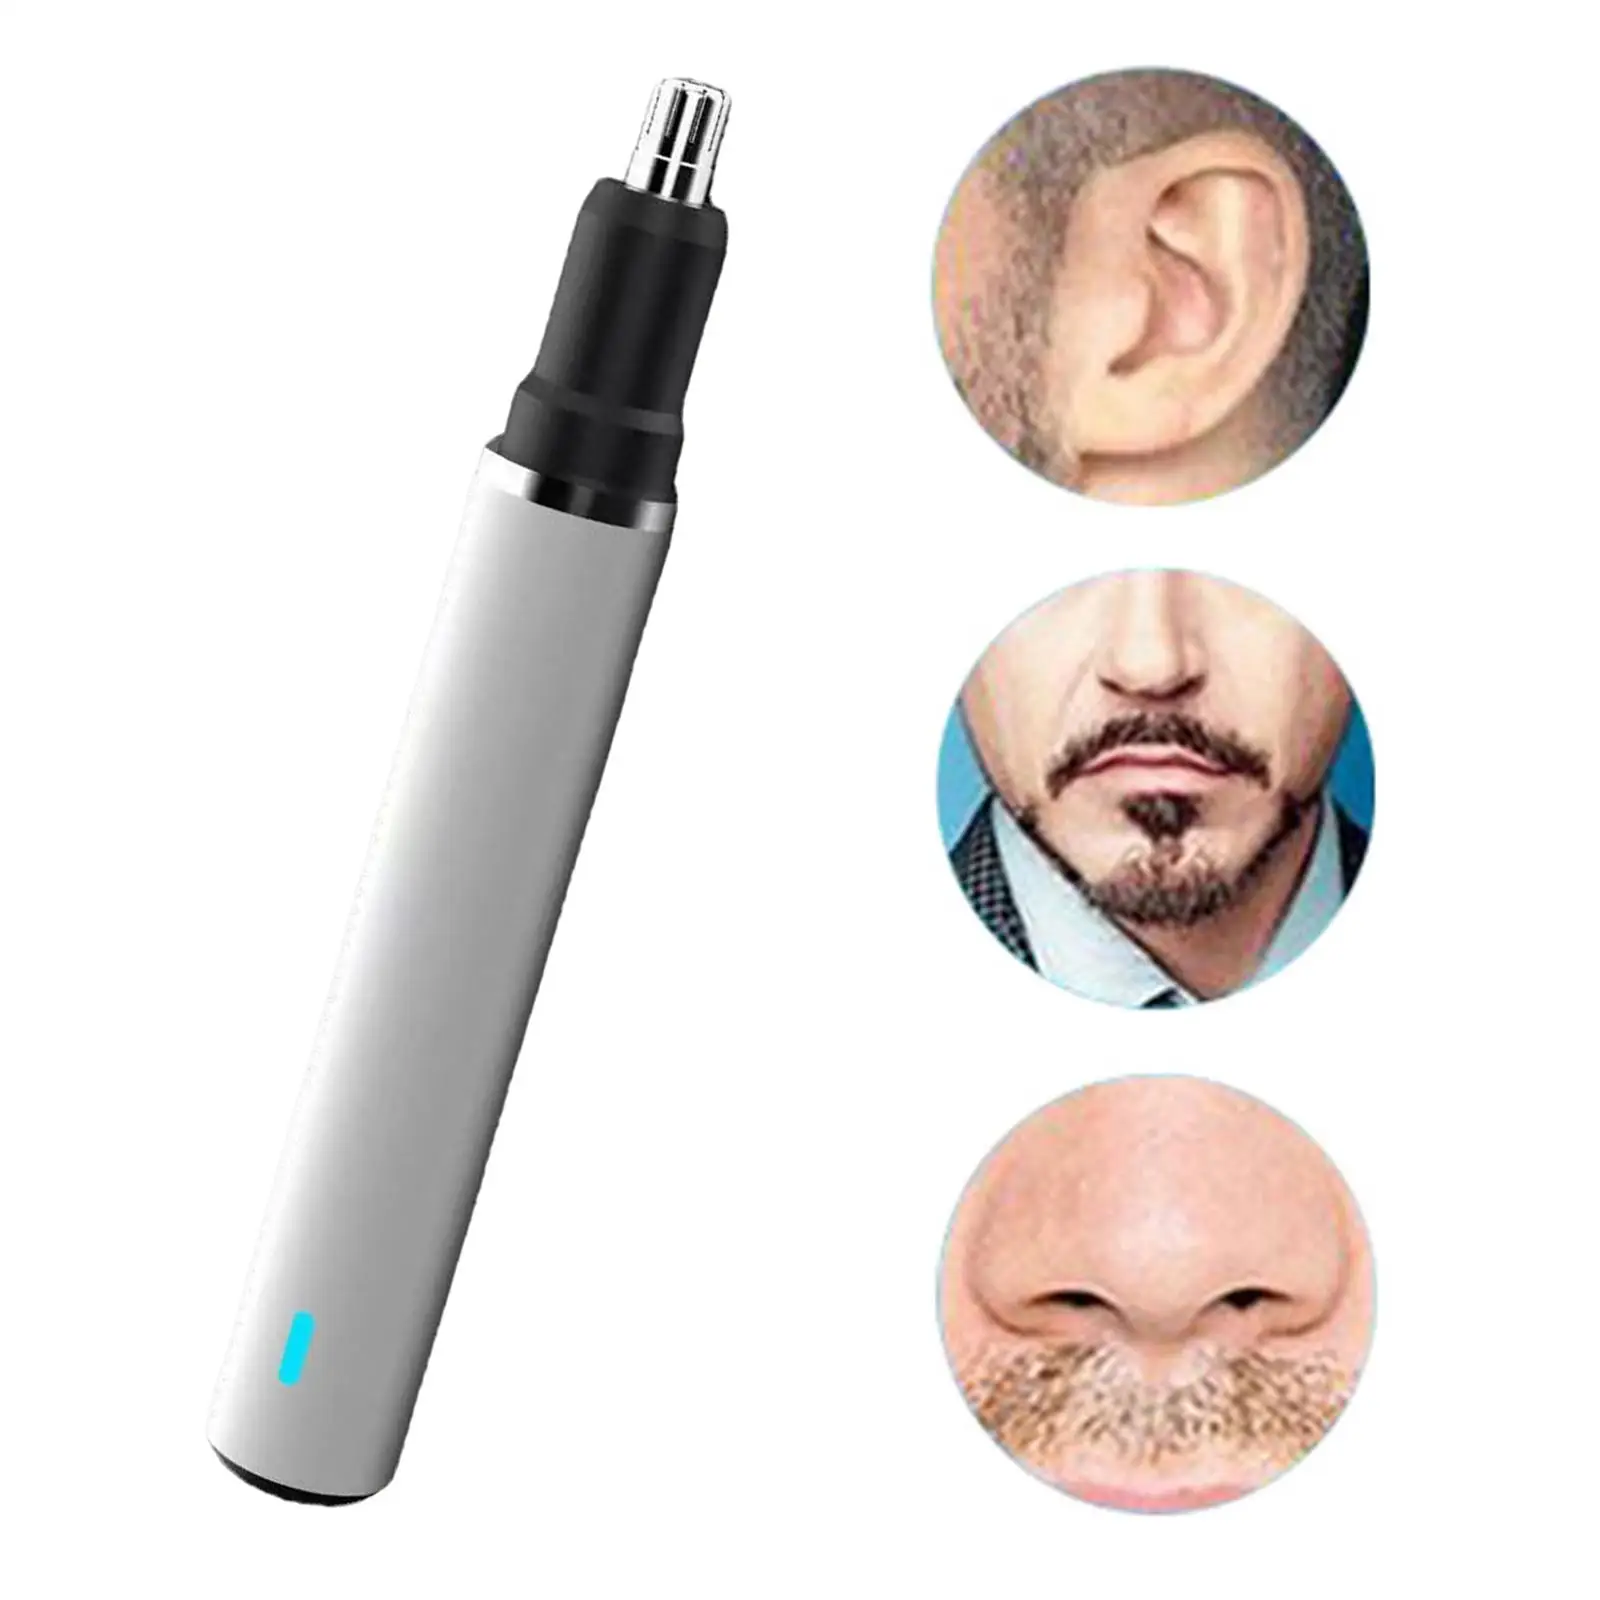 Nose Ear Hair Trimmer Smooth Cutting Wet and Dry Hair Clipper Remover Easy to Clean Powerful Nose Hair Trimmers